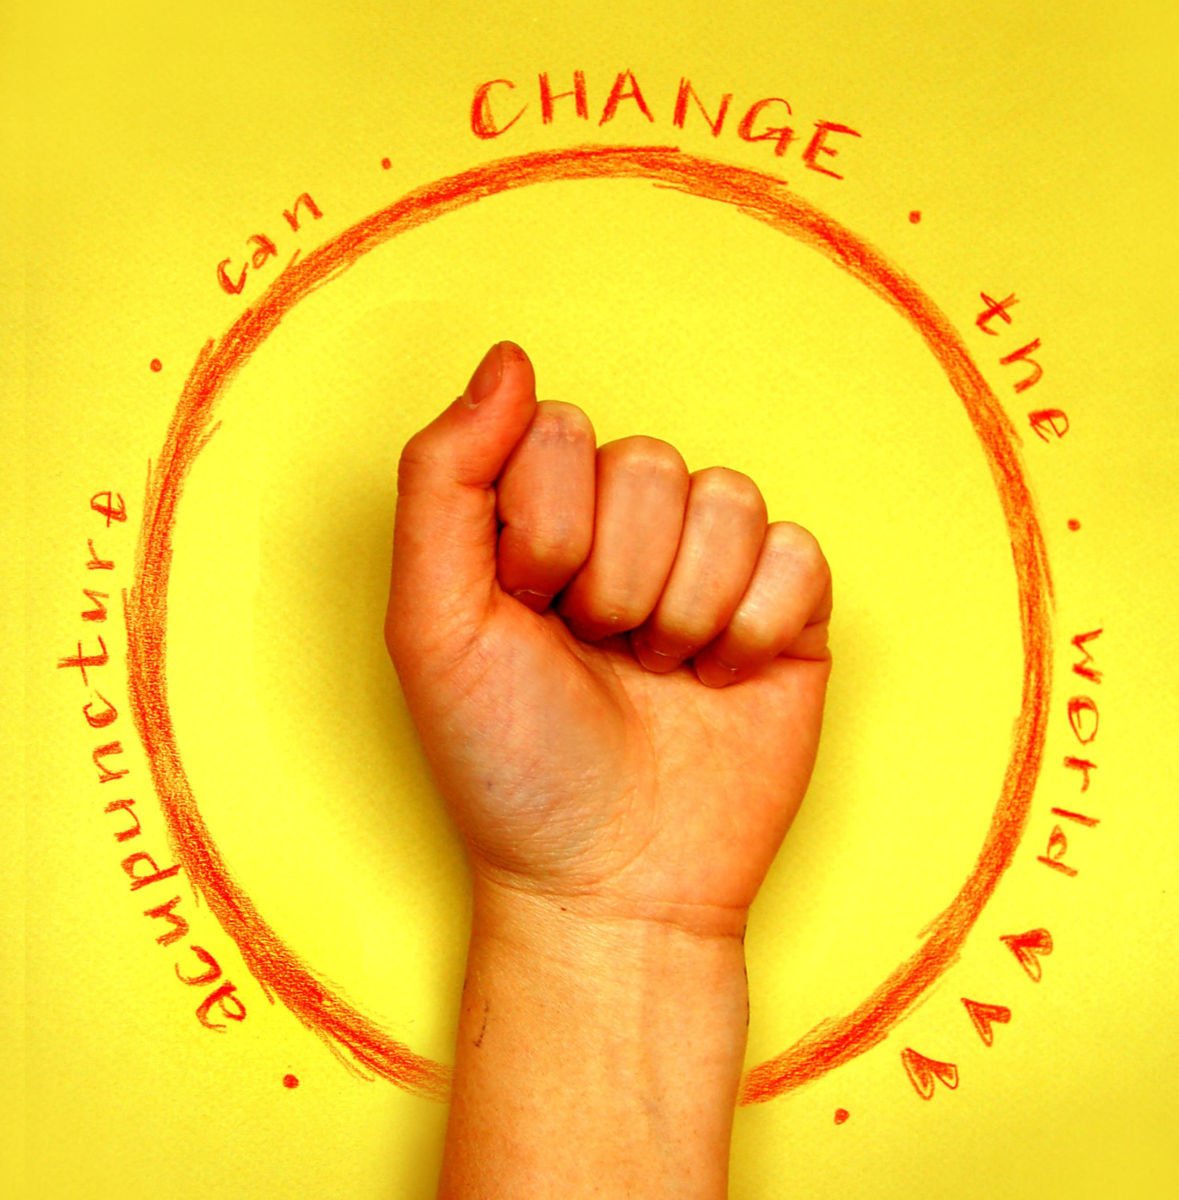 Acupuncture can change the world in red on a yellow background with Christina Chan's fist in the foreground